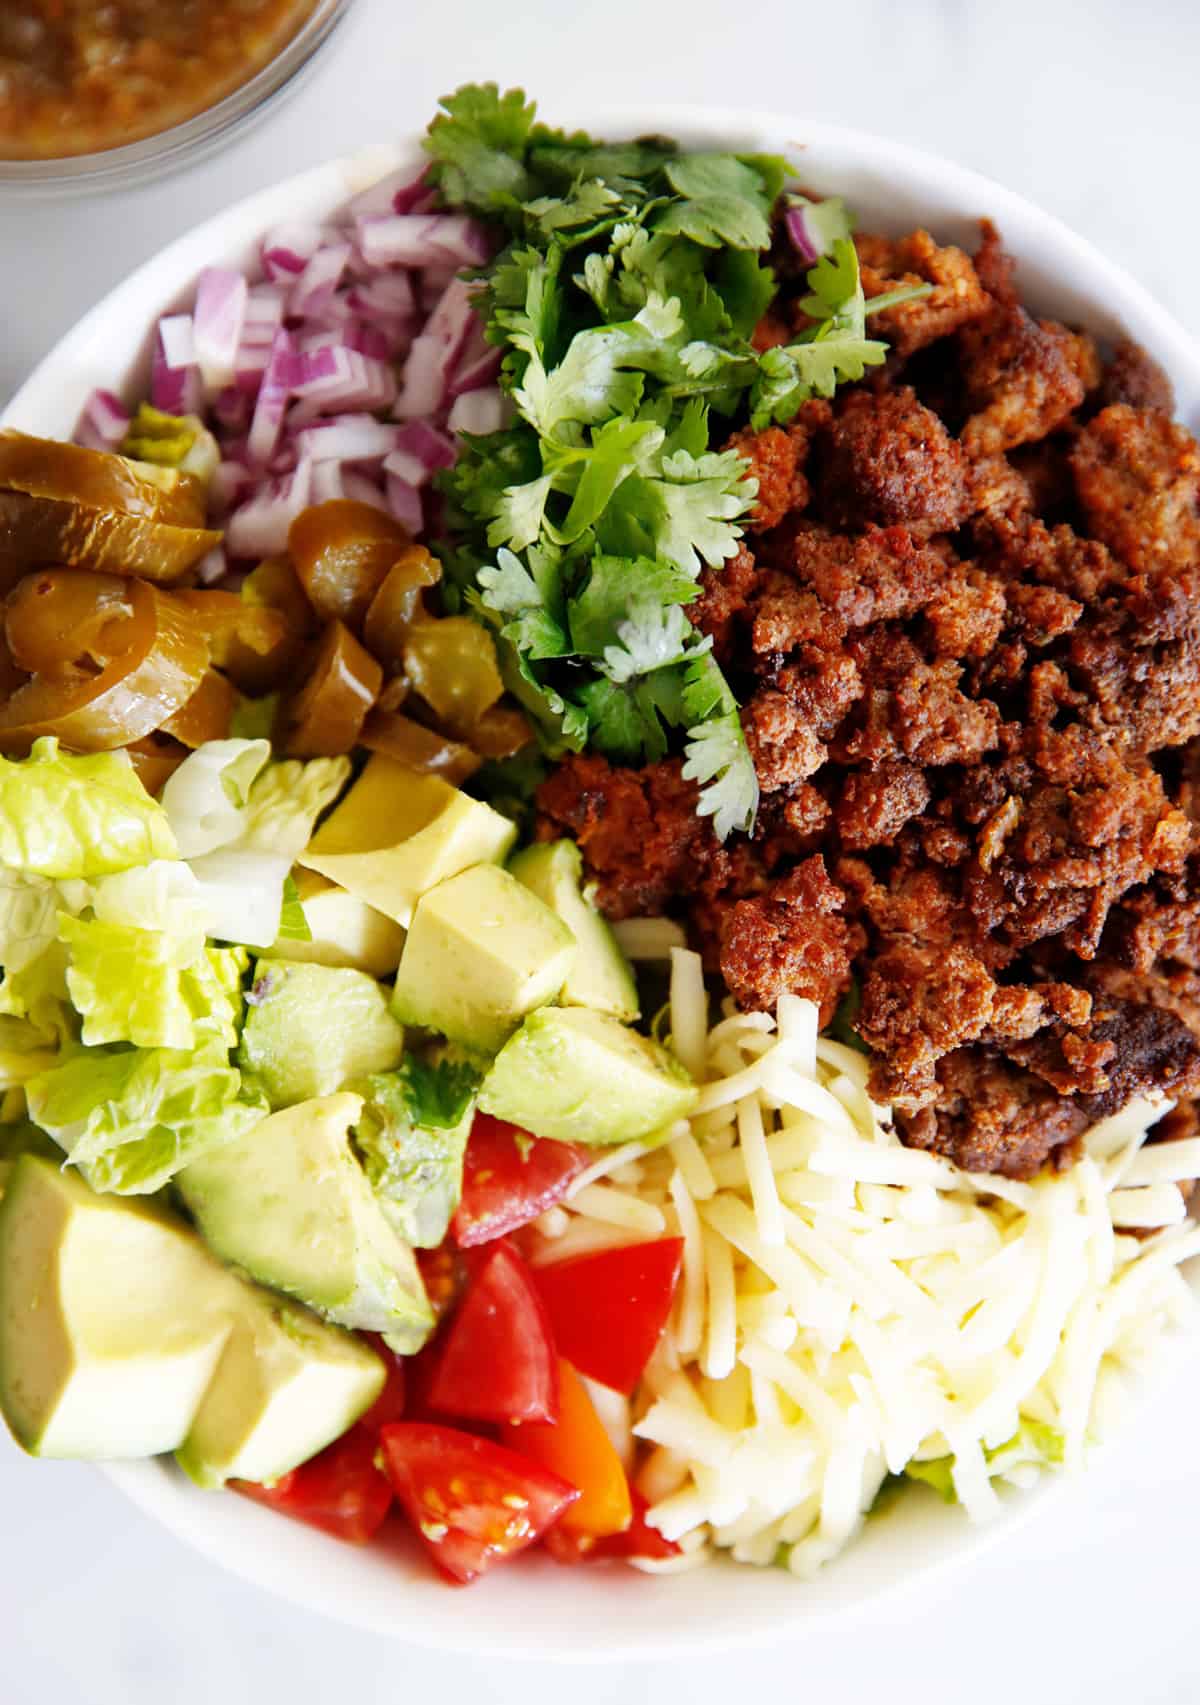 Ingredients for taco salad